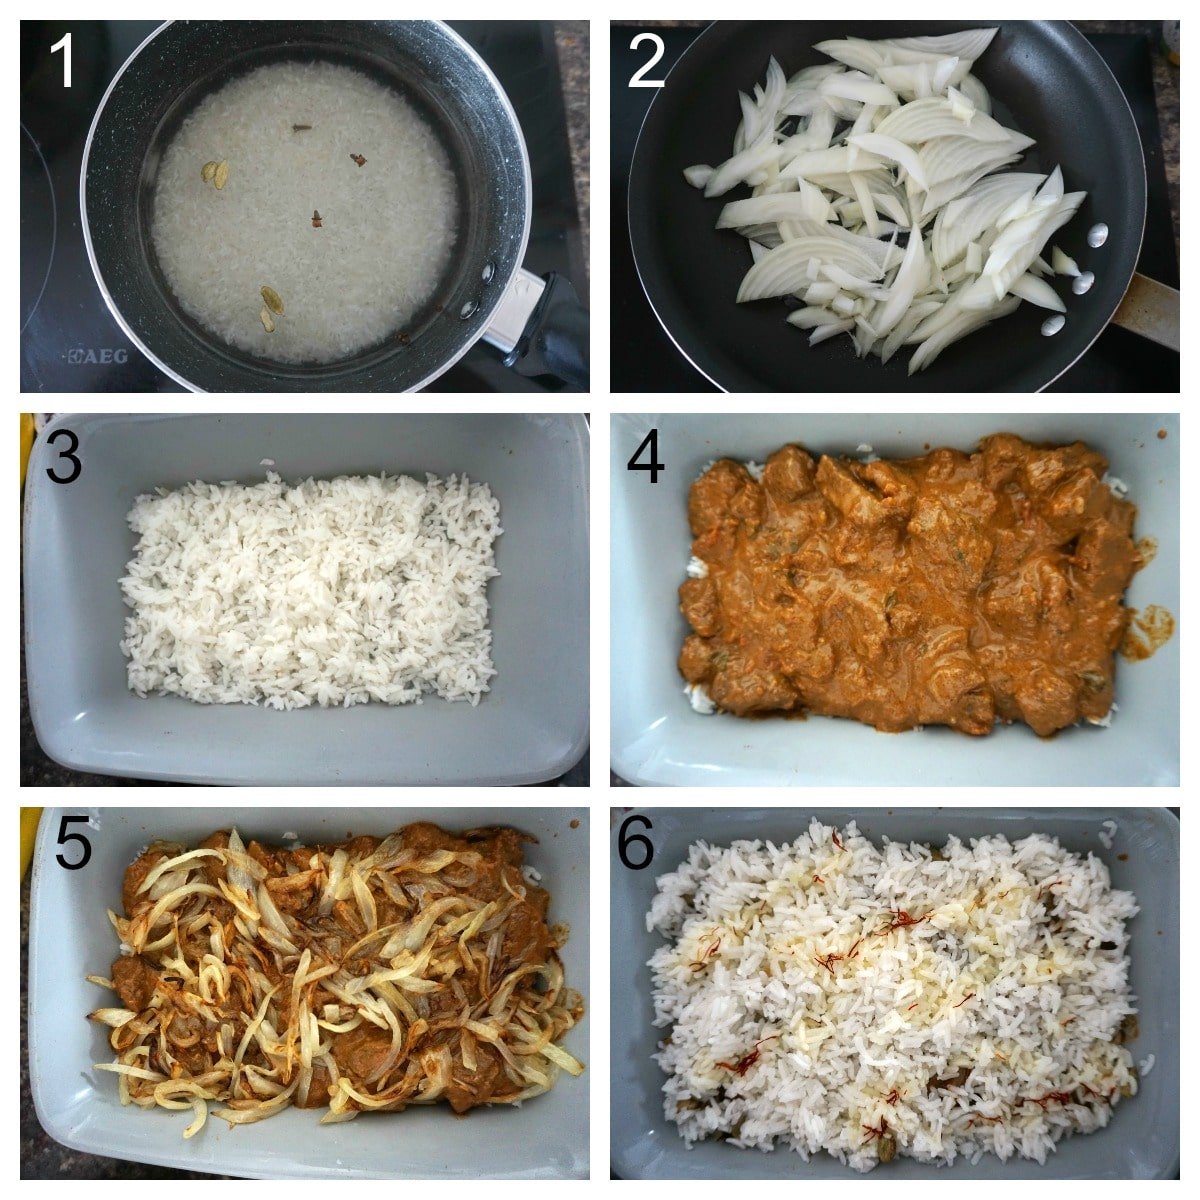 Collage of 6 photos to show how to assemble beef biryani.